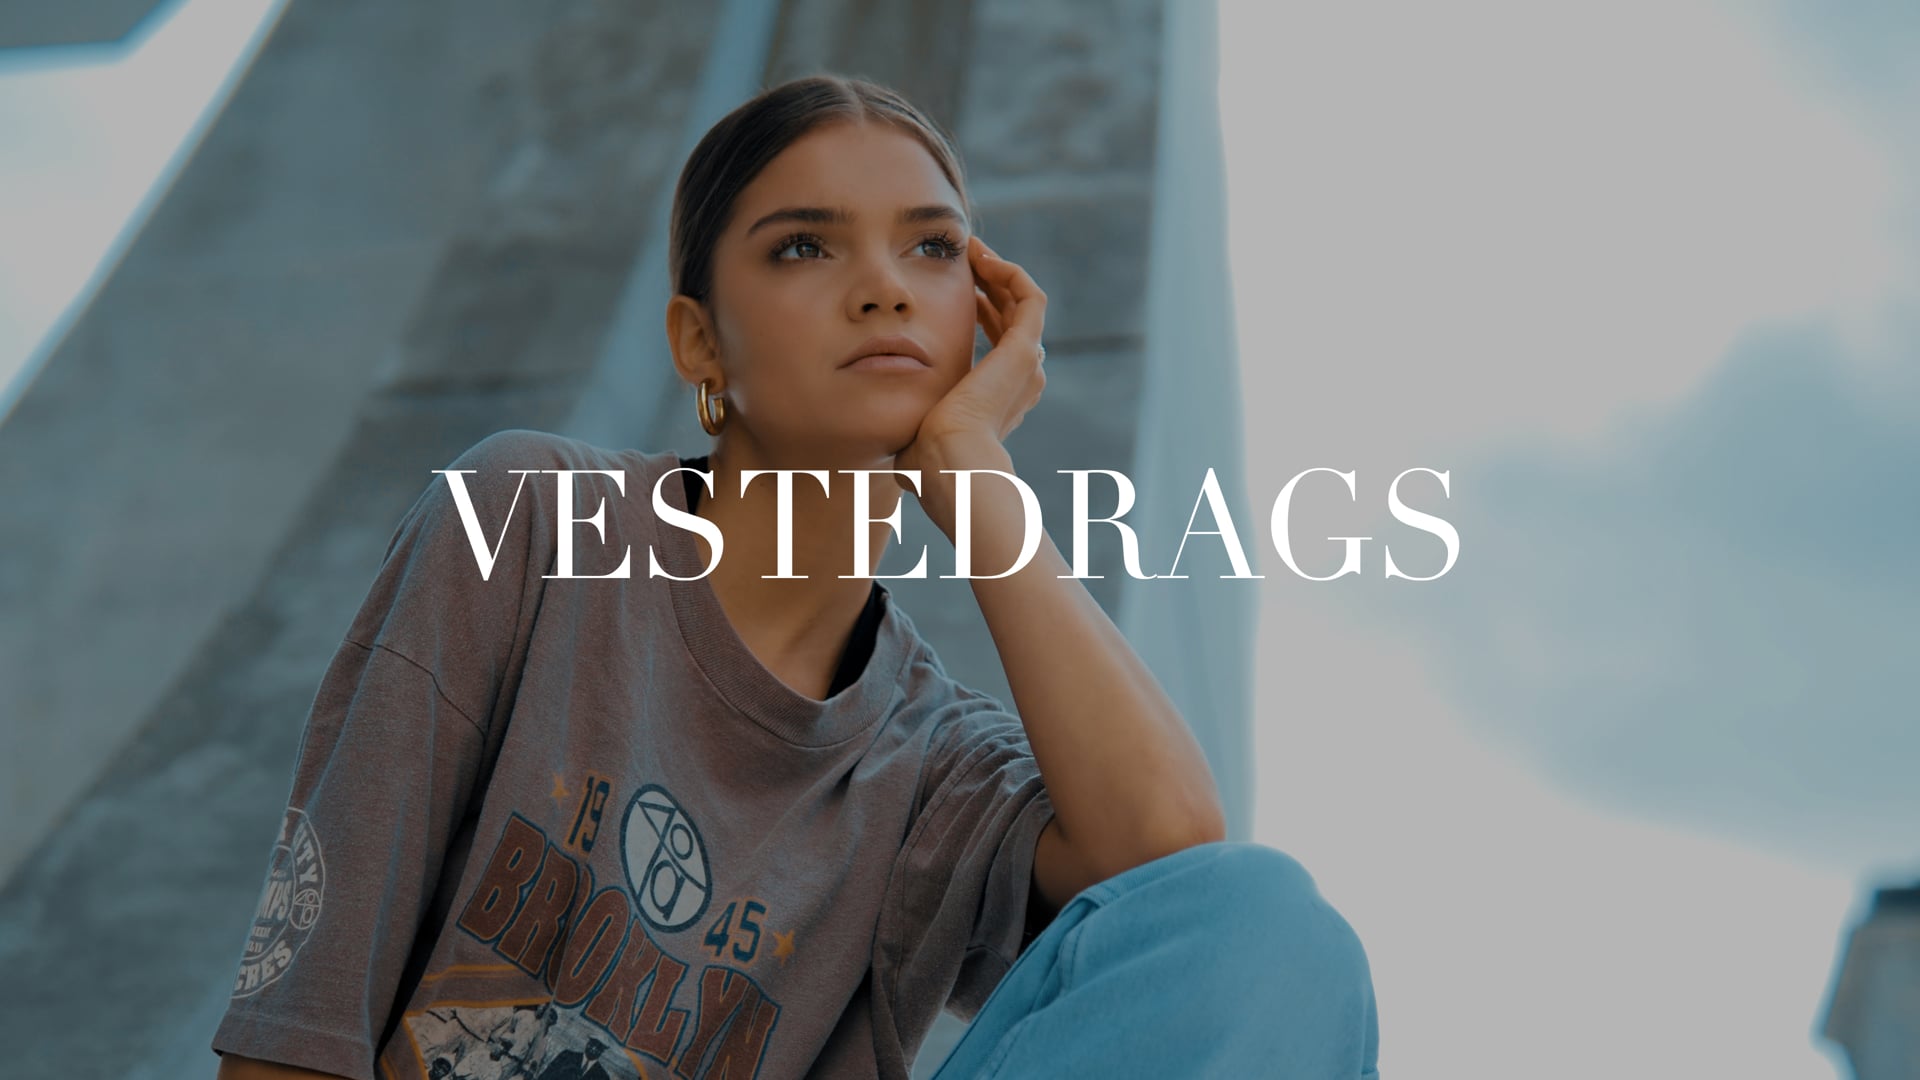 VESTED RAGS | FASHION VIDEO